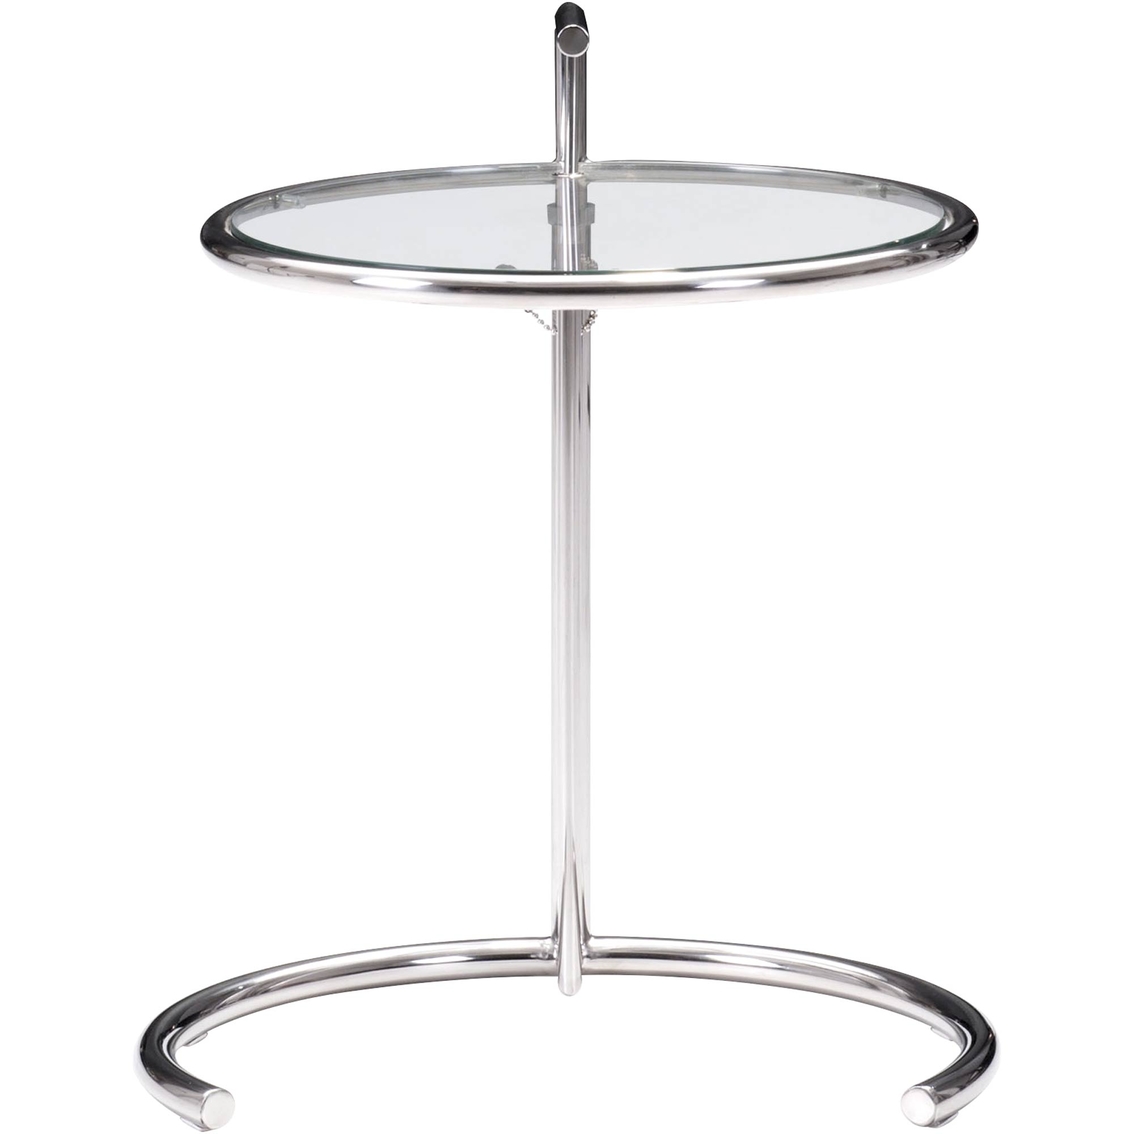 Zuo Eileen Grey Table - Image 2 of 4